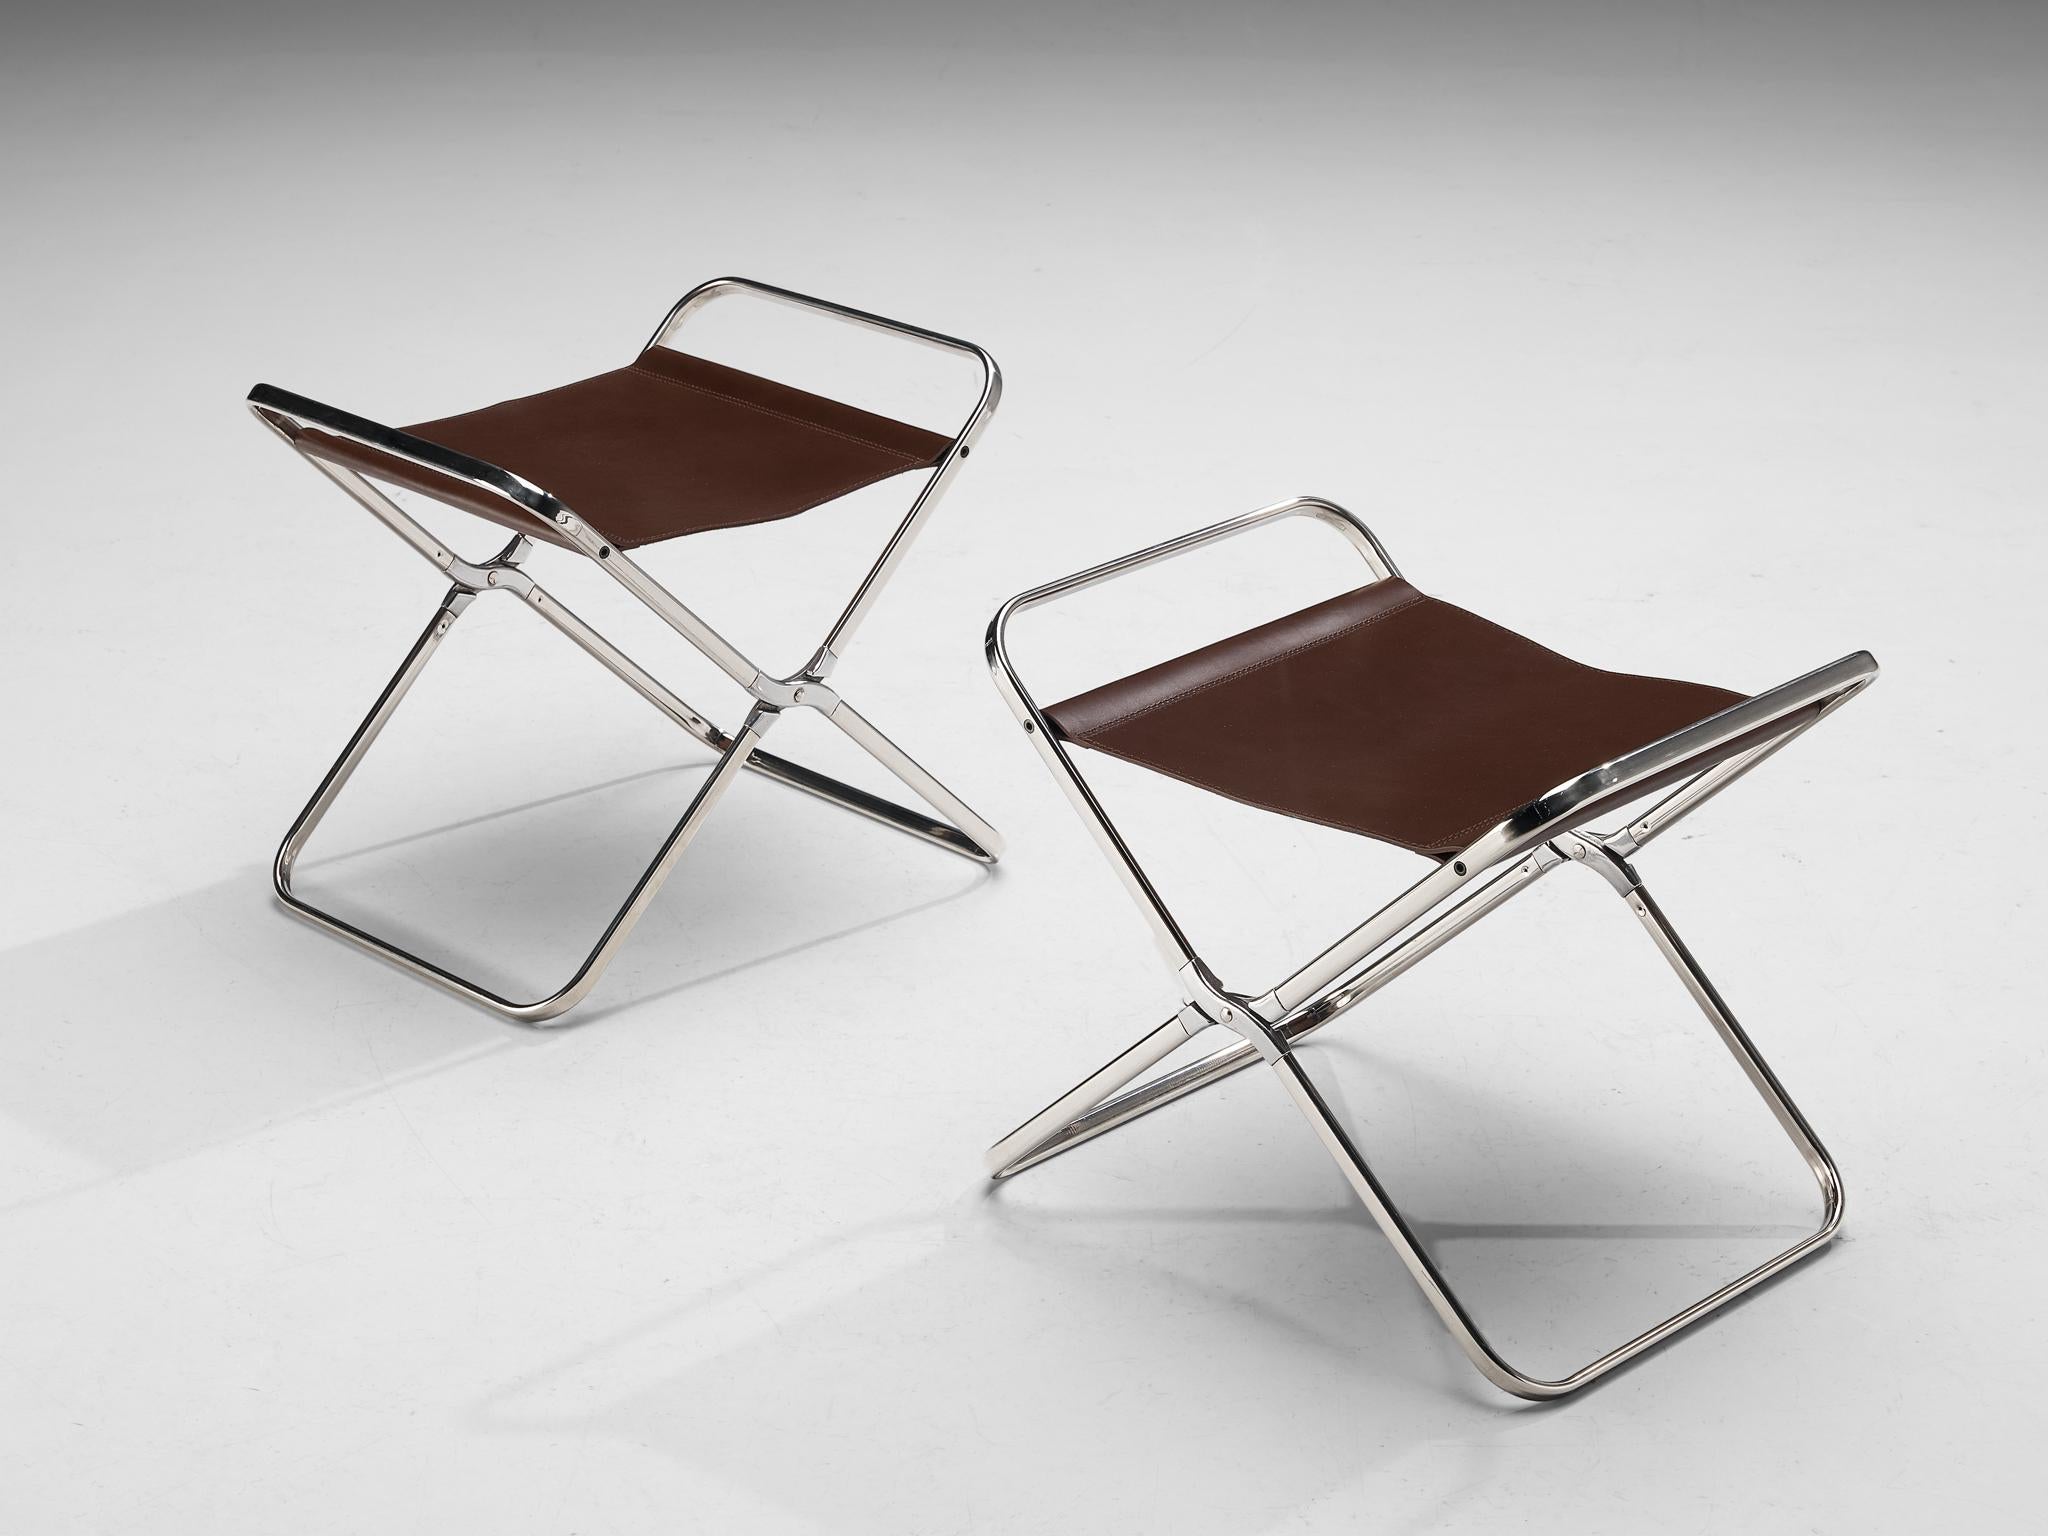 Gae Aulenti for Zanotta 'April' Folding Stools in Stainless Steel and Leather 5